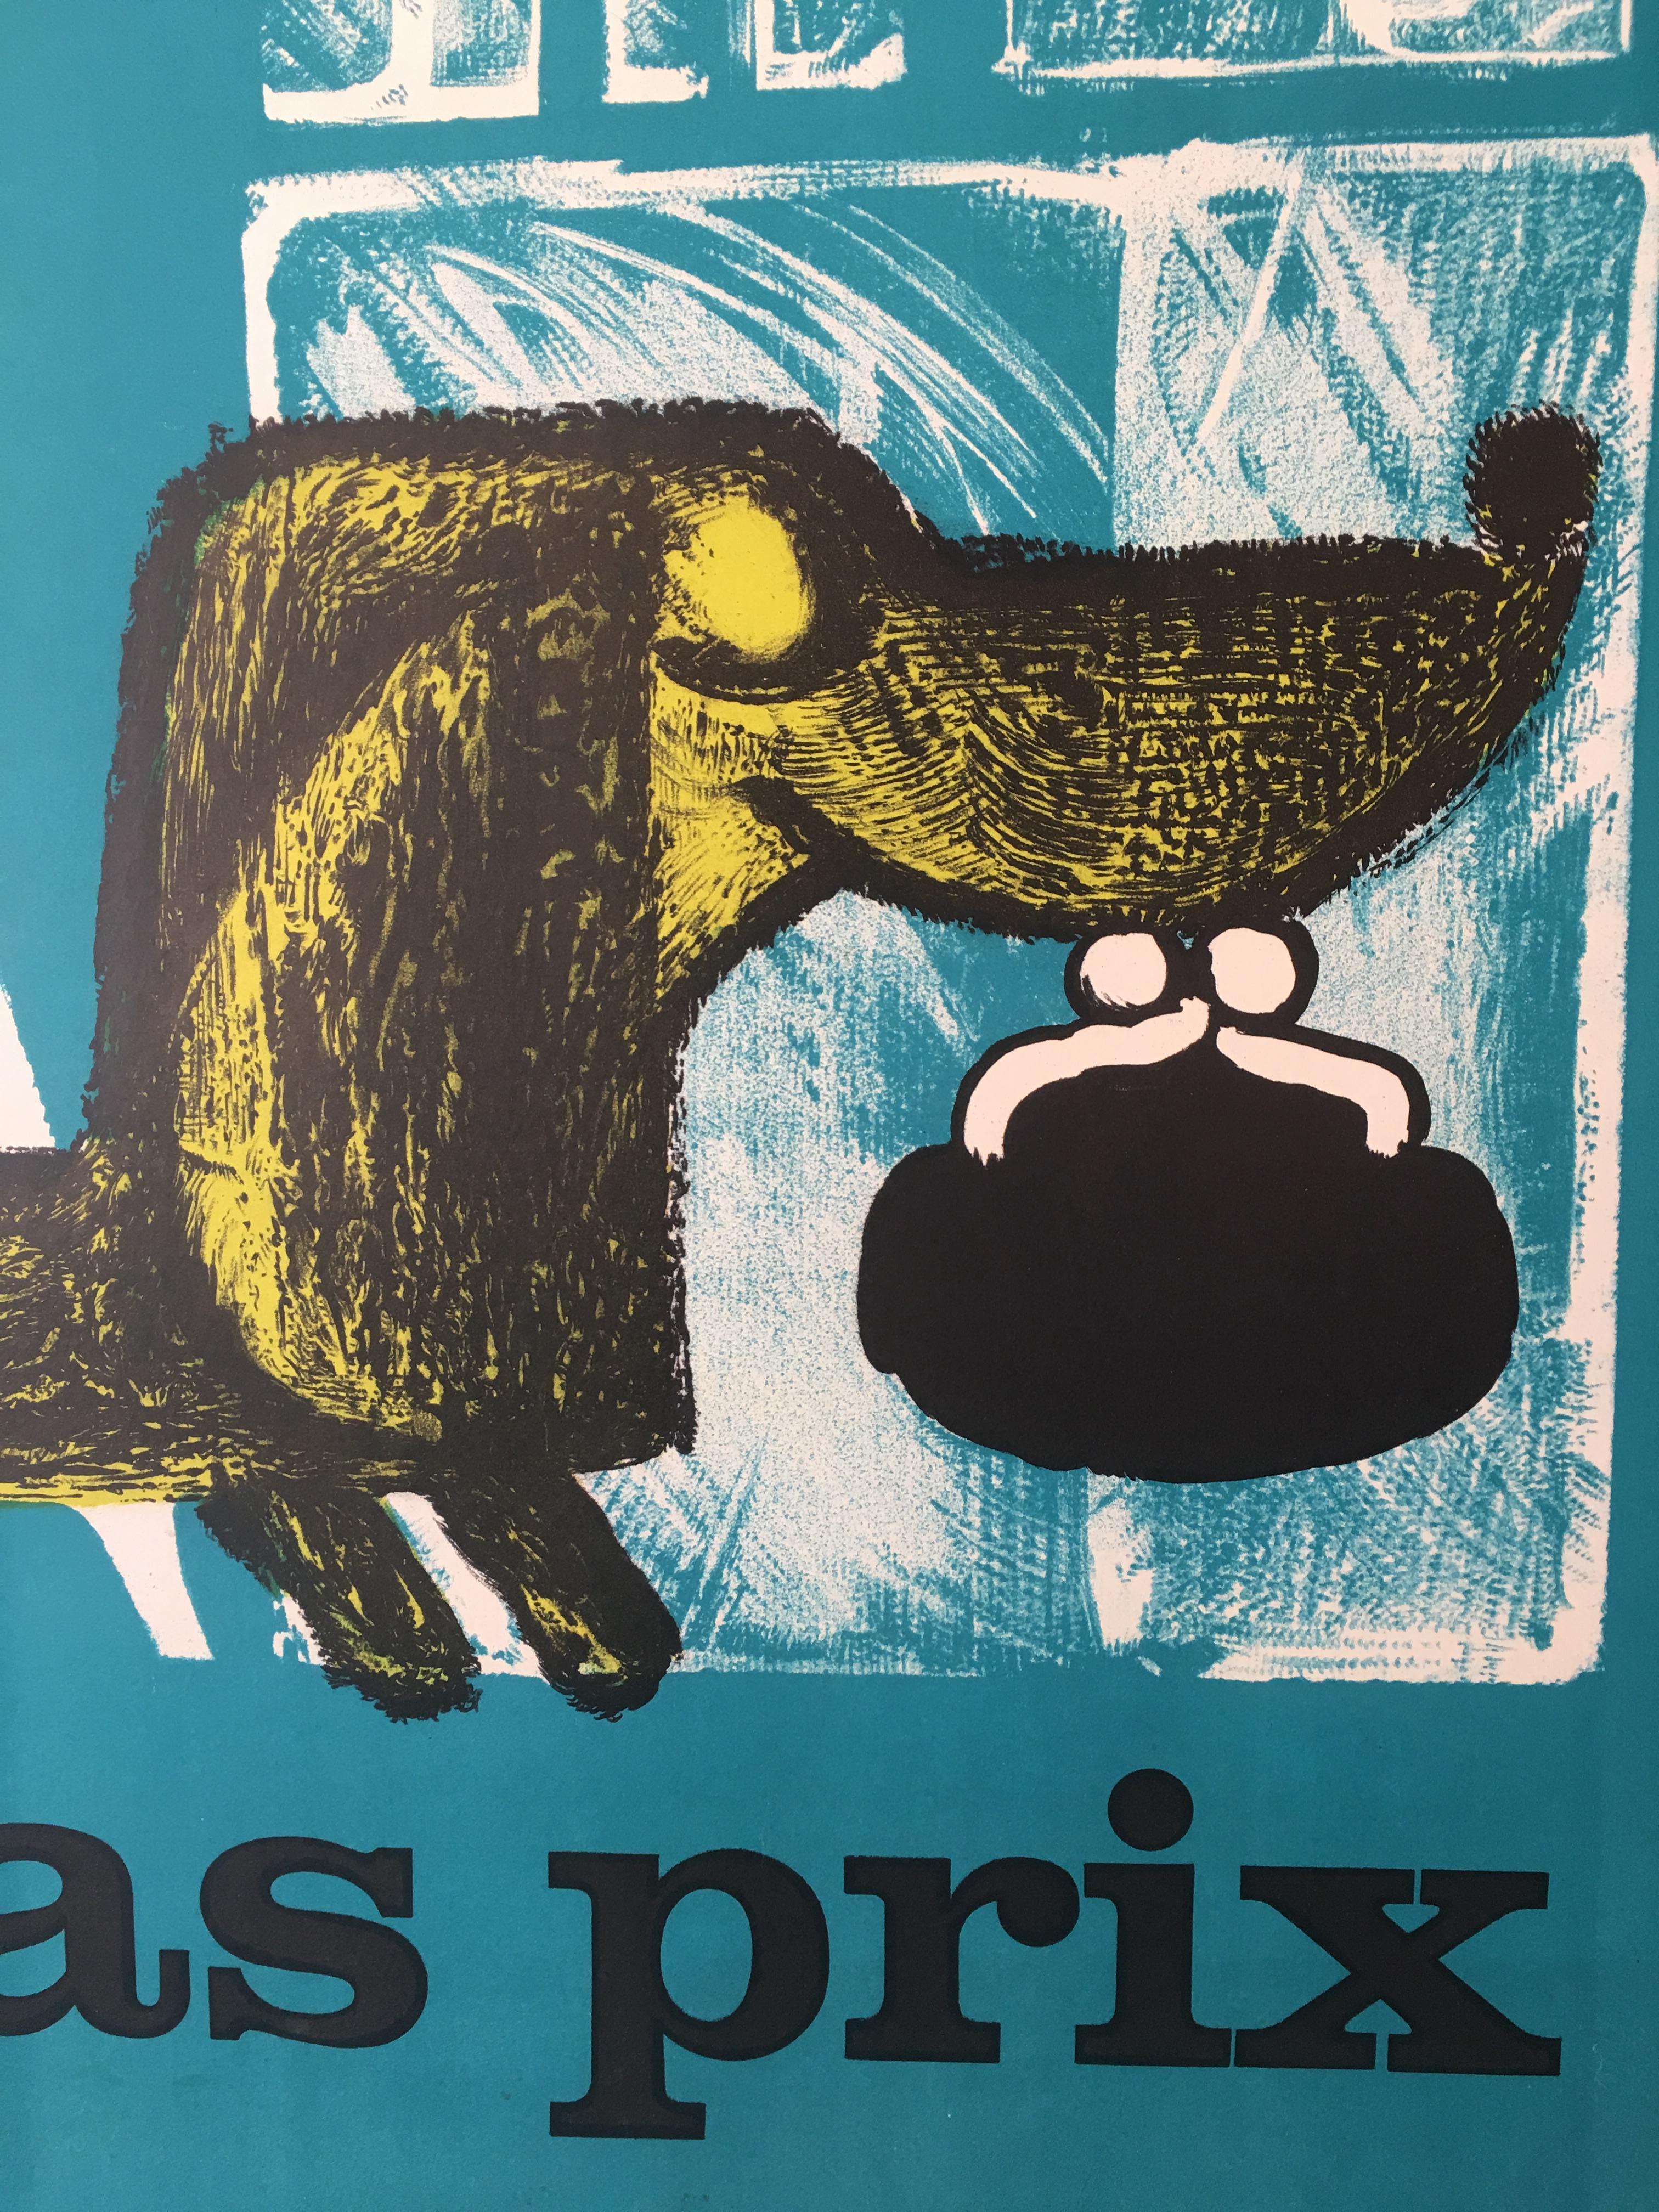 Original vintage 1960s French sale advertising poster 'Bas prix' by Rousseau. 

A charming 1960s poster featuring a sausage-dog holding a purse walking underneath a giraffe, 'bas prix' translates to 'low price' 
 
Artist: 
Rousseau 

Year